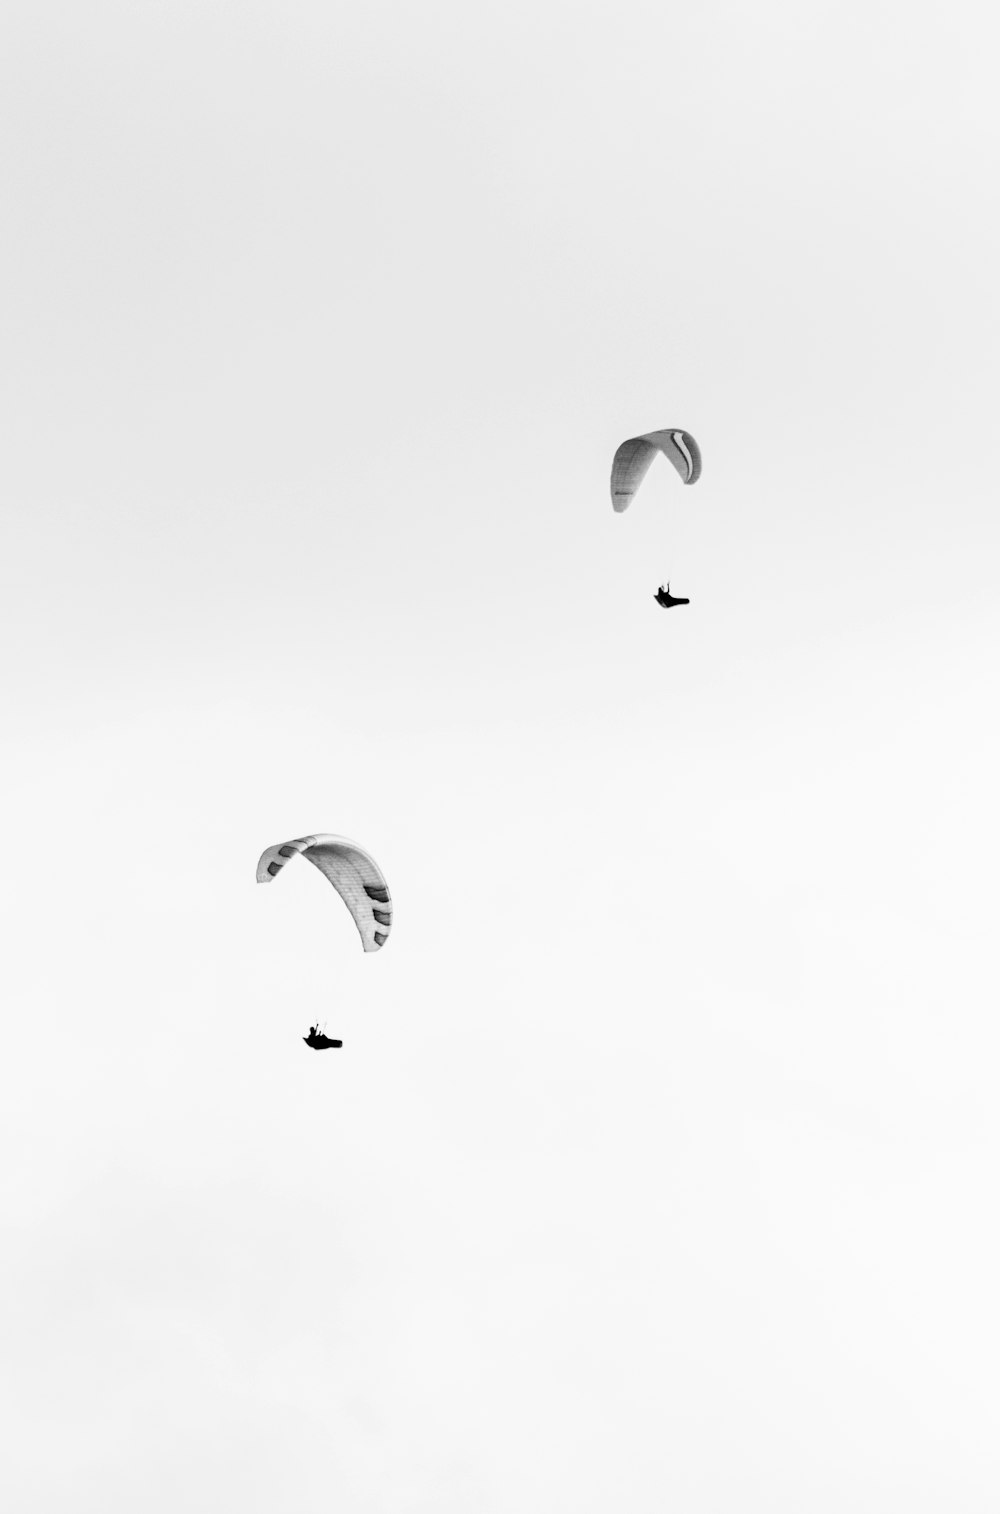 people riding parachute in the sky